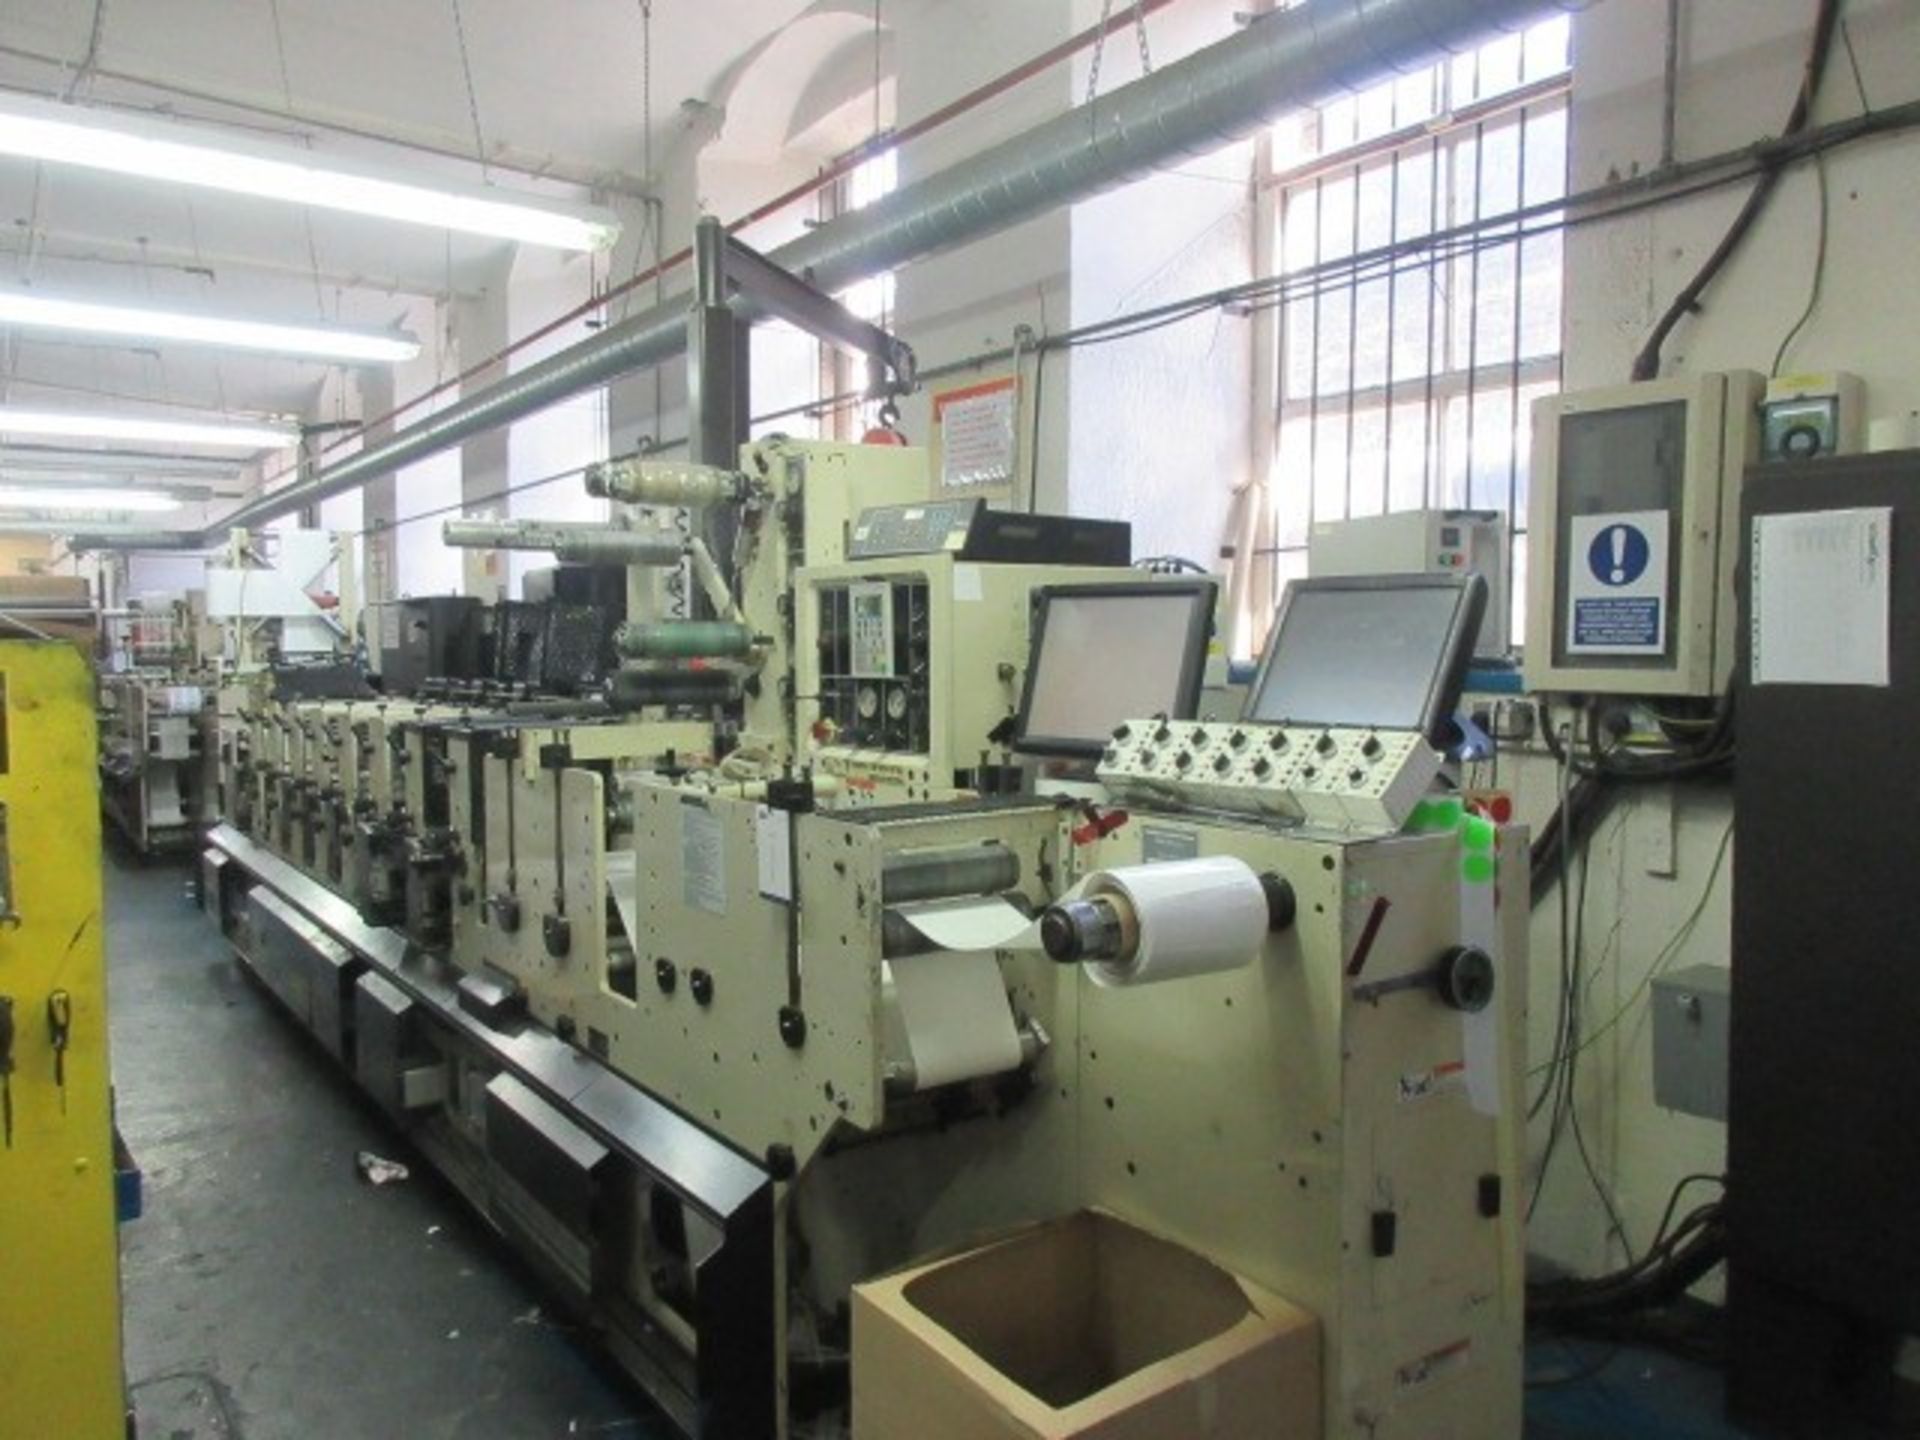 Mark Andy 2200-10F 10” 8 colour flexographic label printing press. Serial no: 1260086 (2002) - Image 115 of 383